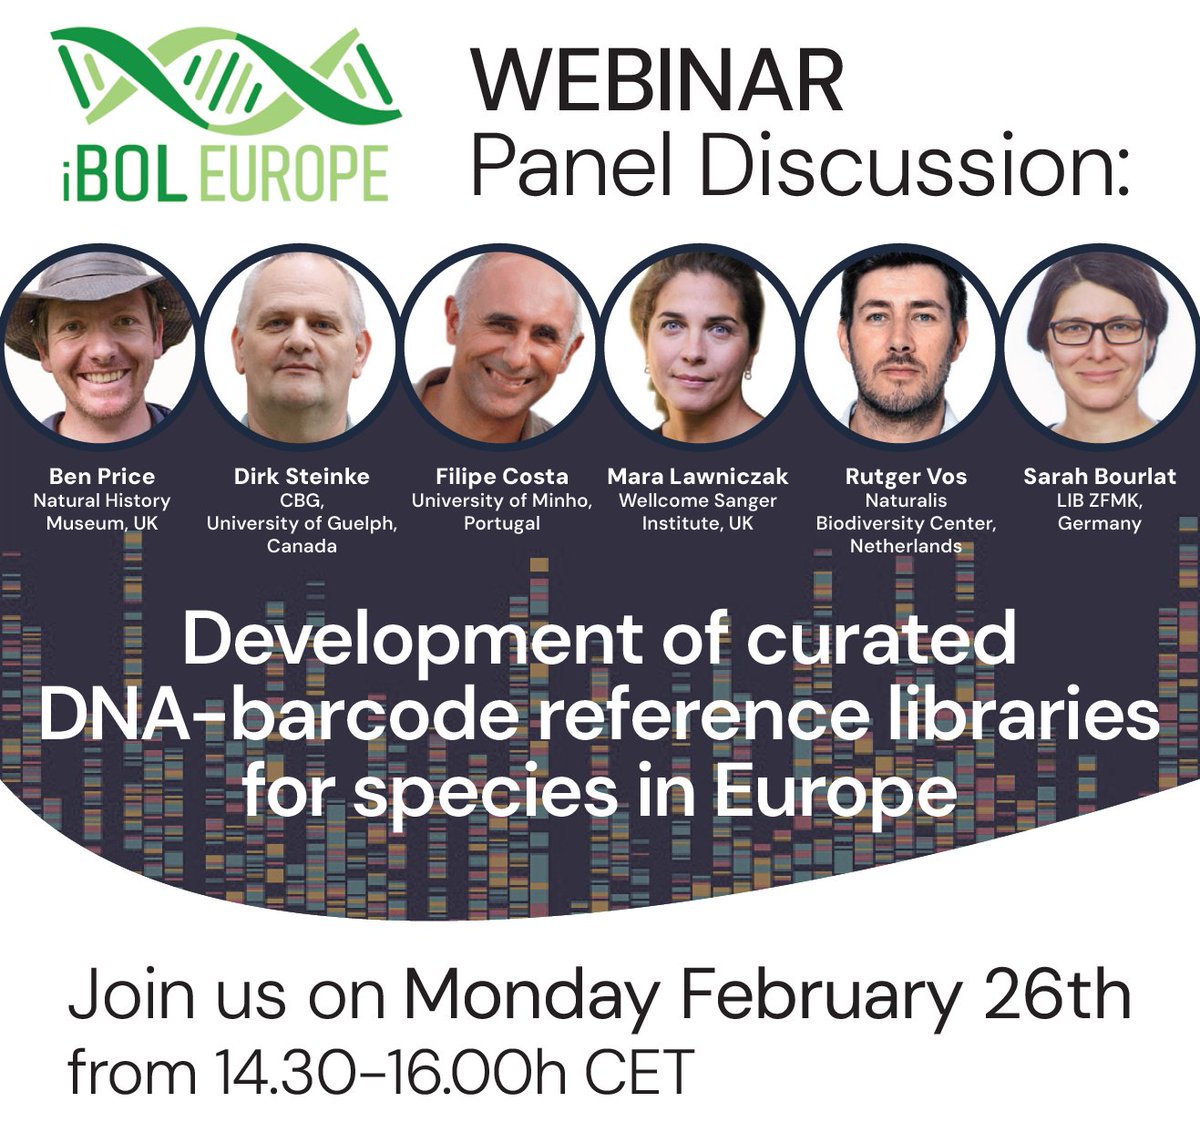 Today is the day! Our webinar with expert panel discussion about Development of curated #DNAbarcode reference libraries starts at 14.30h CET.

See here more info: iboleurope.org/webinar-on-dev…